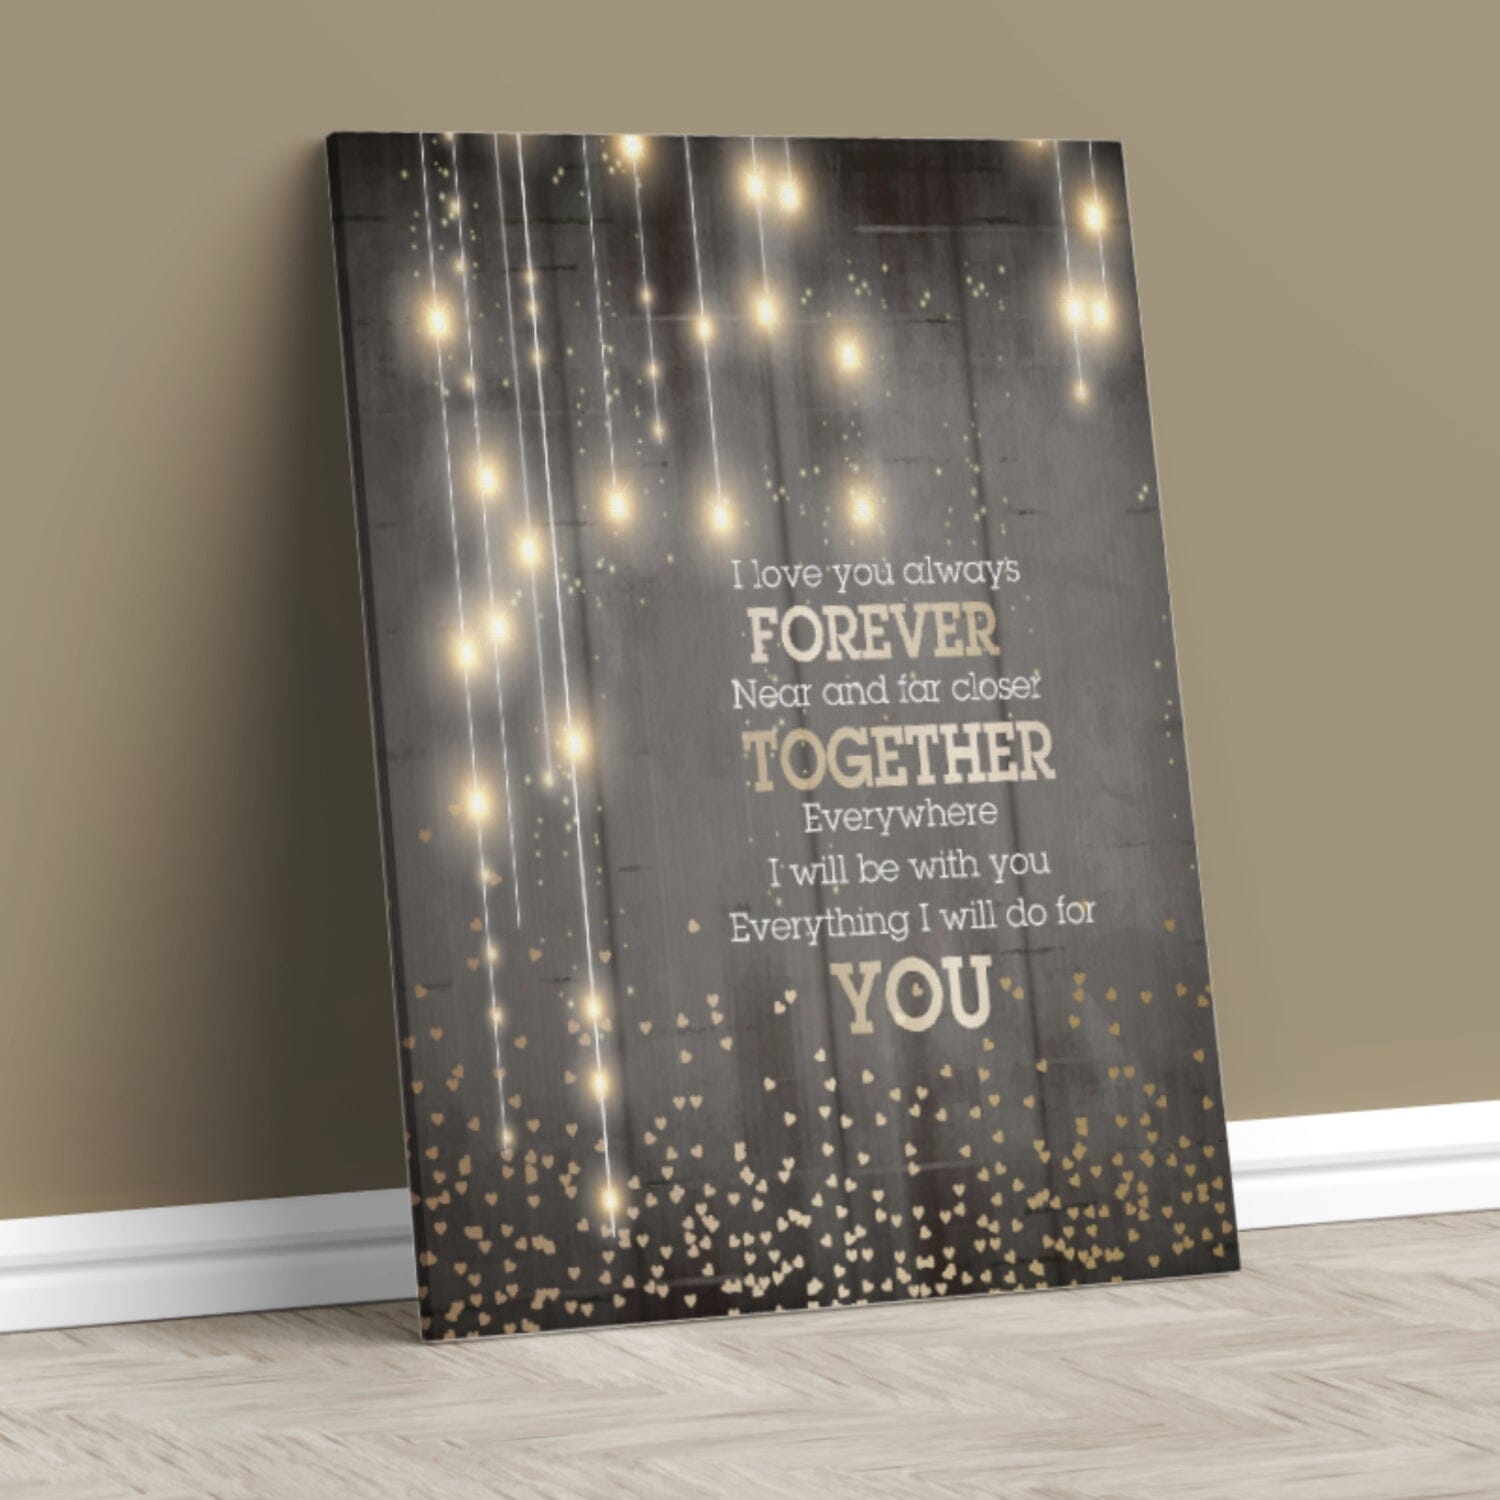 I Love You Always Forever - Donna Lewis Pop Song Lyric Print Song Lyrics Art Song Lyrics Art 11x14 Canvas Wrap 